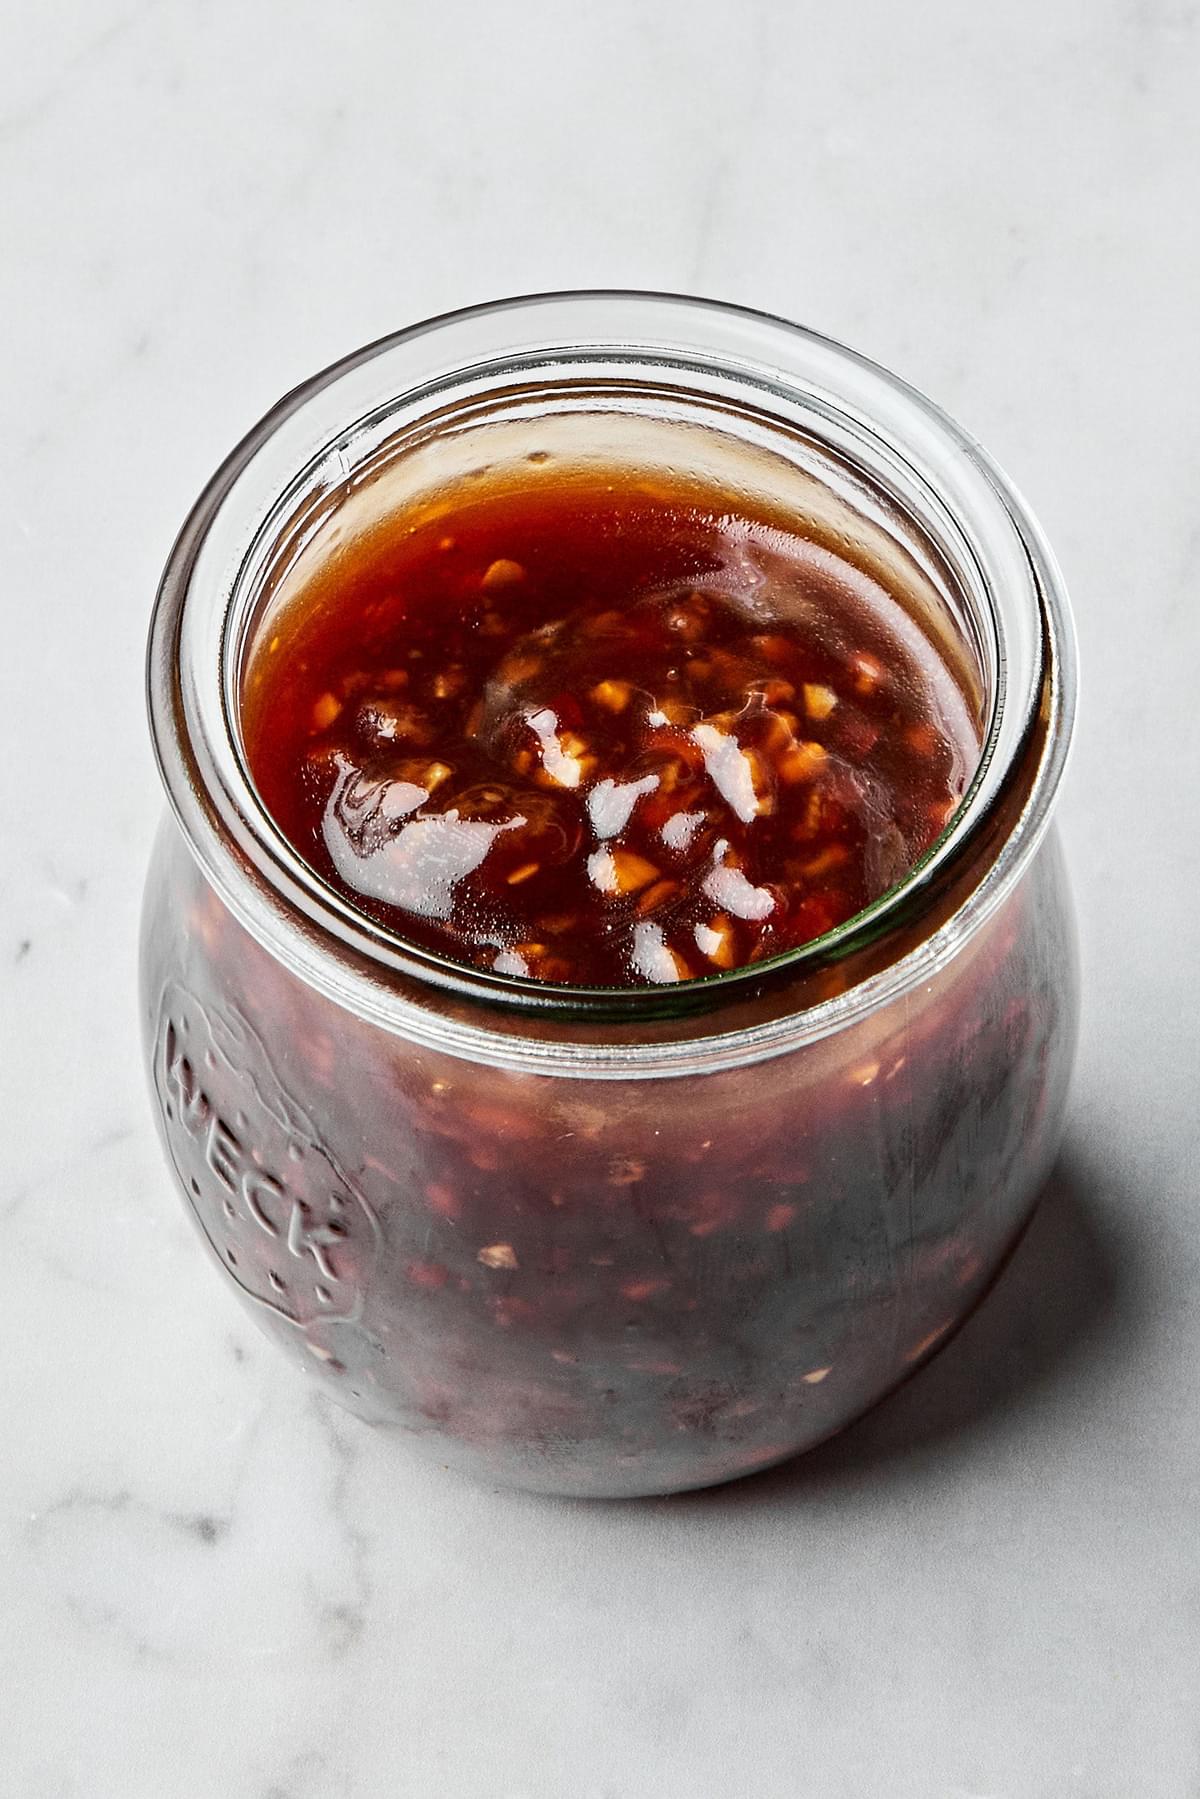 a jar of homemade stir fry sauce made with soy sauce sesame oil garlic, ginger, brown sugar, red pepper flakes and cornstarch